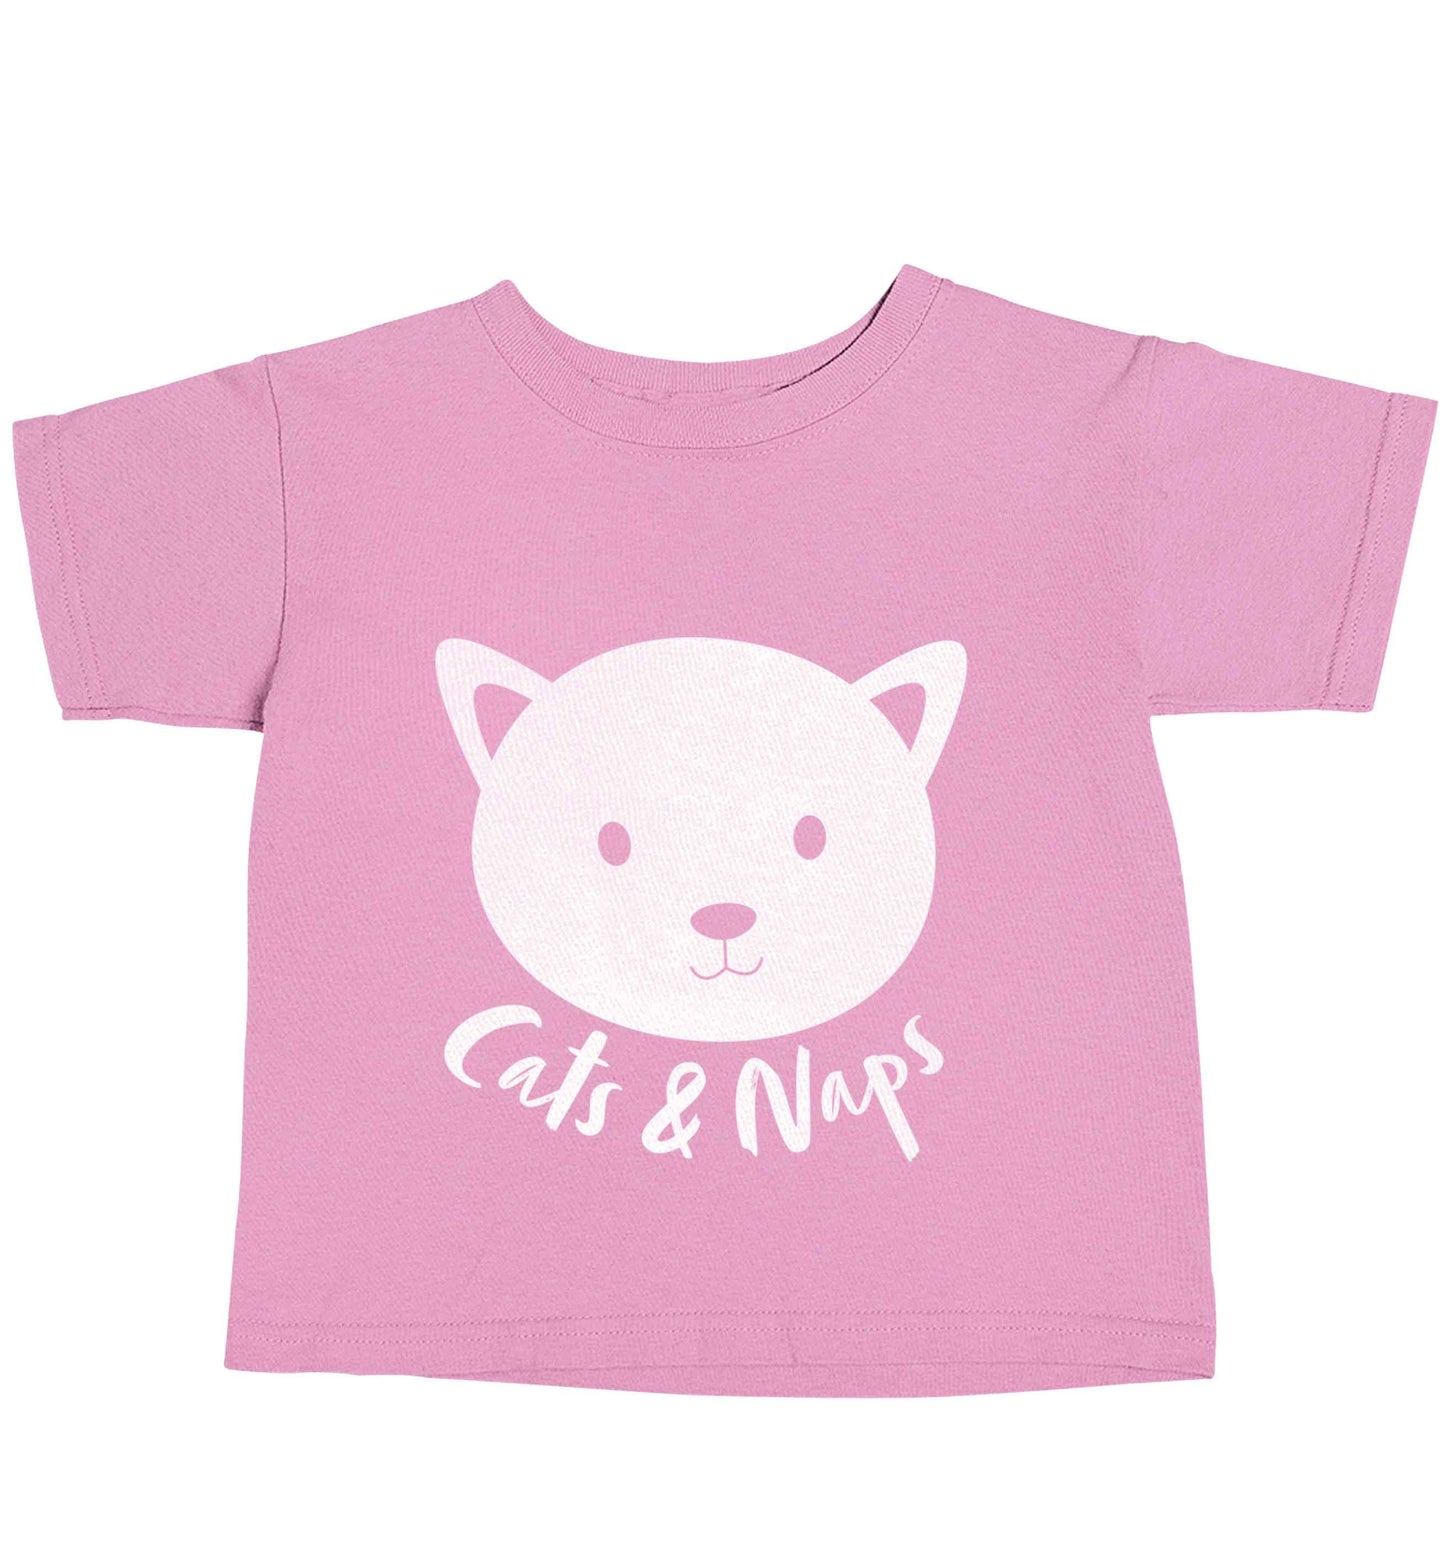 Cats and naps Kit light pink baby toddler Tshirt 2 Years